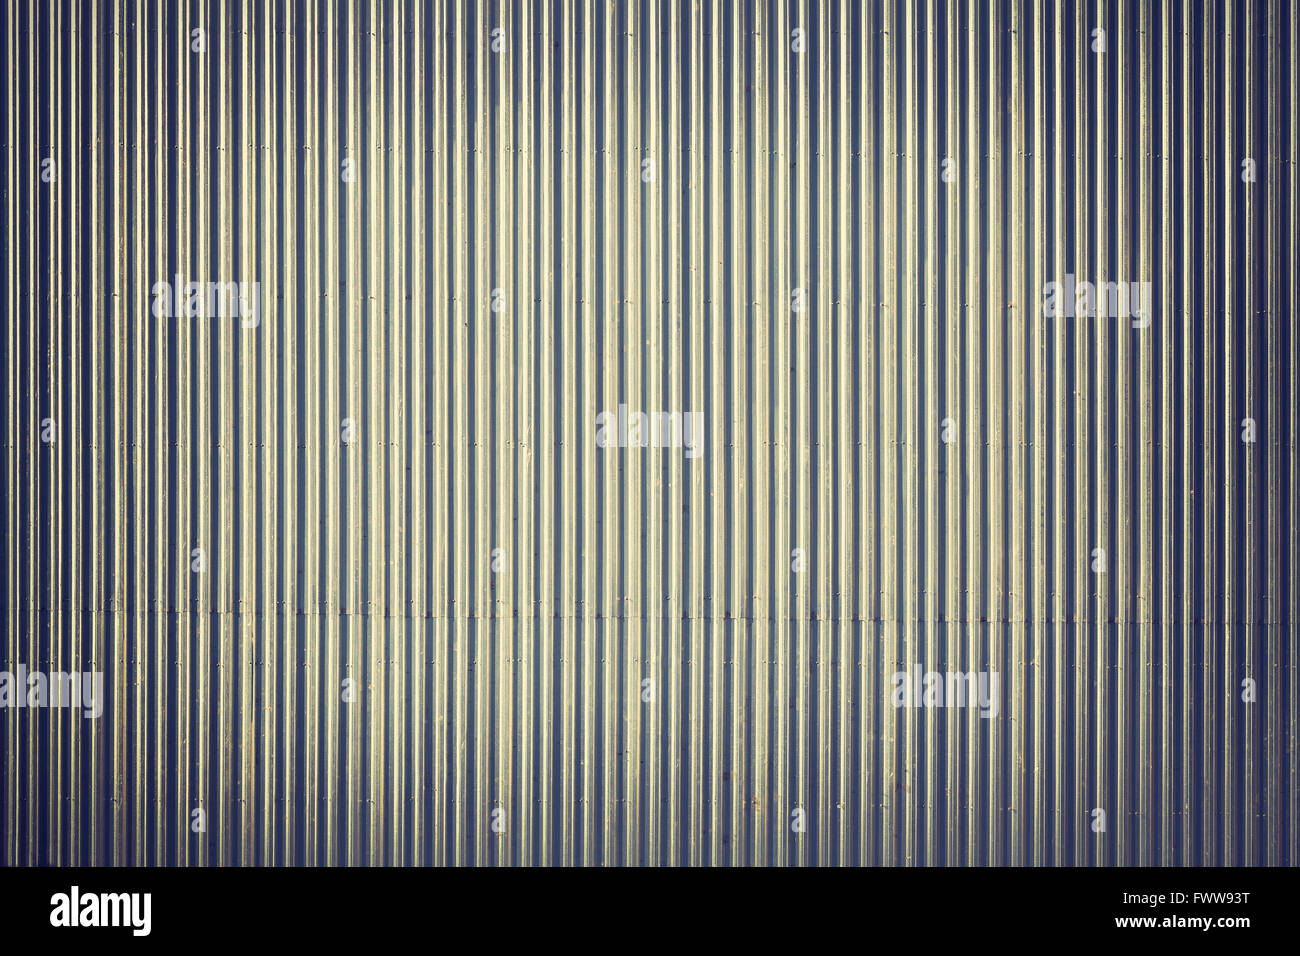 Vintage stylized corrugated metal roof, picture taken from above, industrial background or texture. Stock Photo